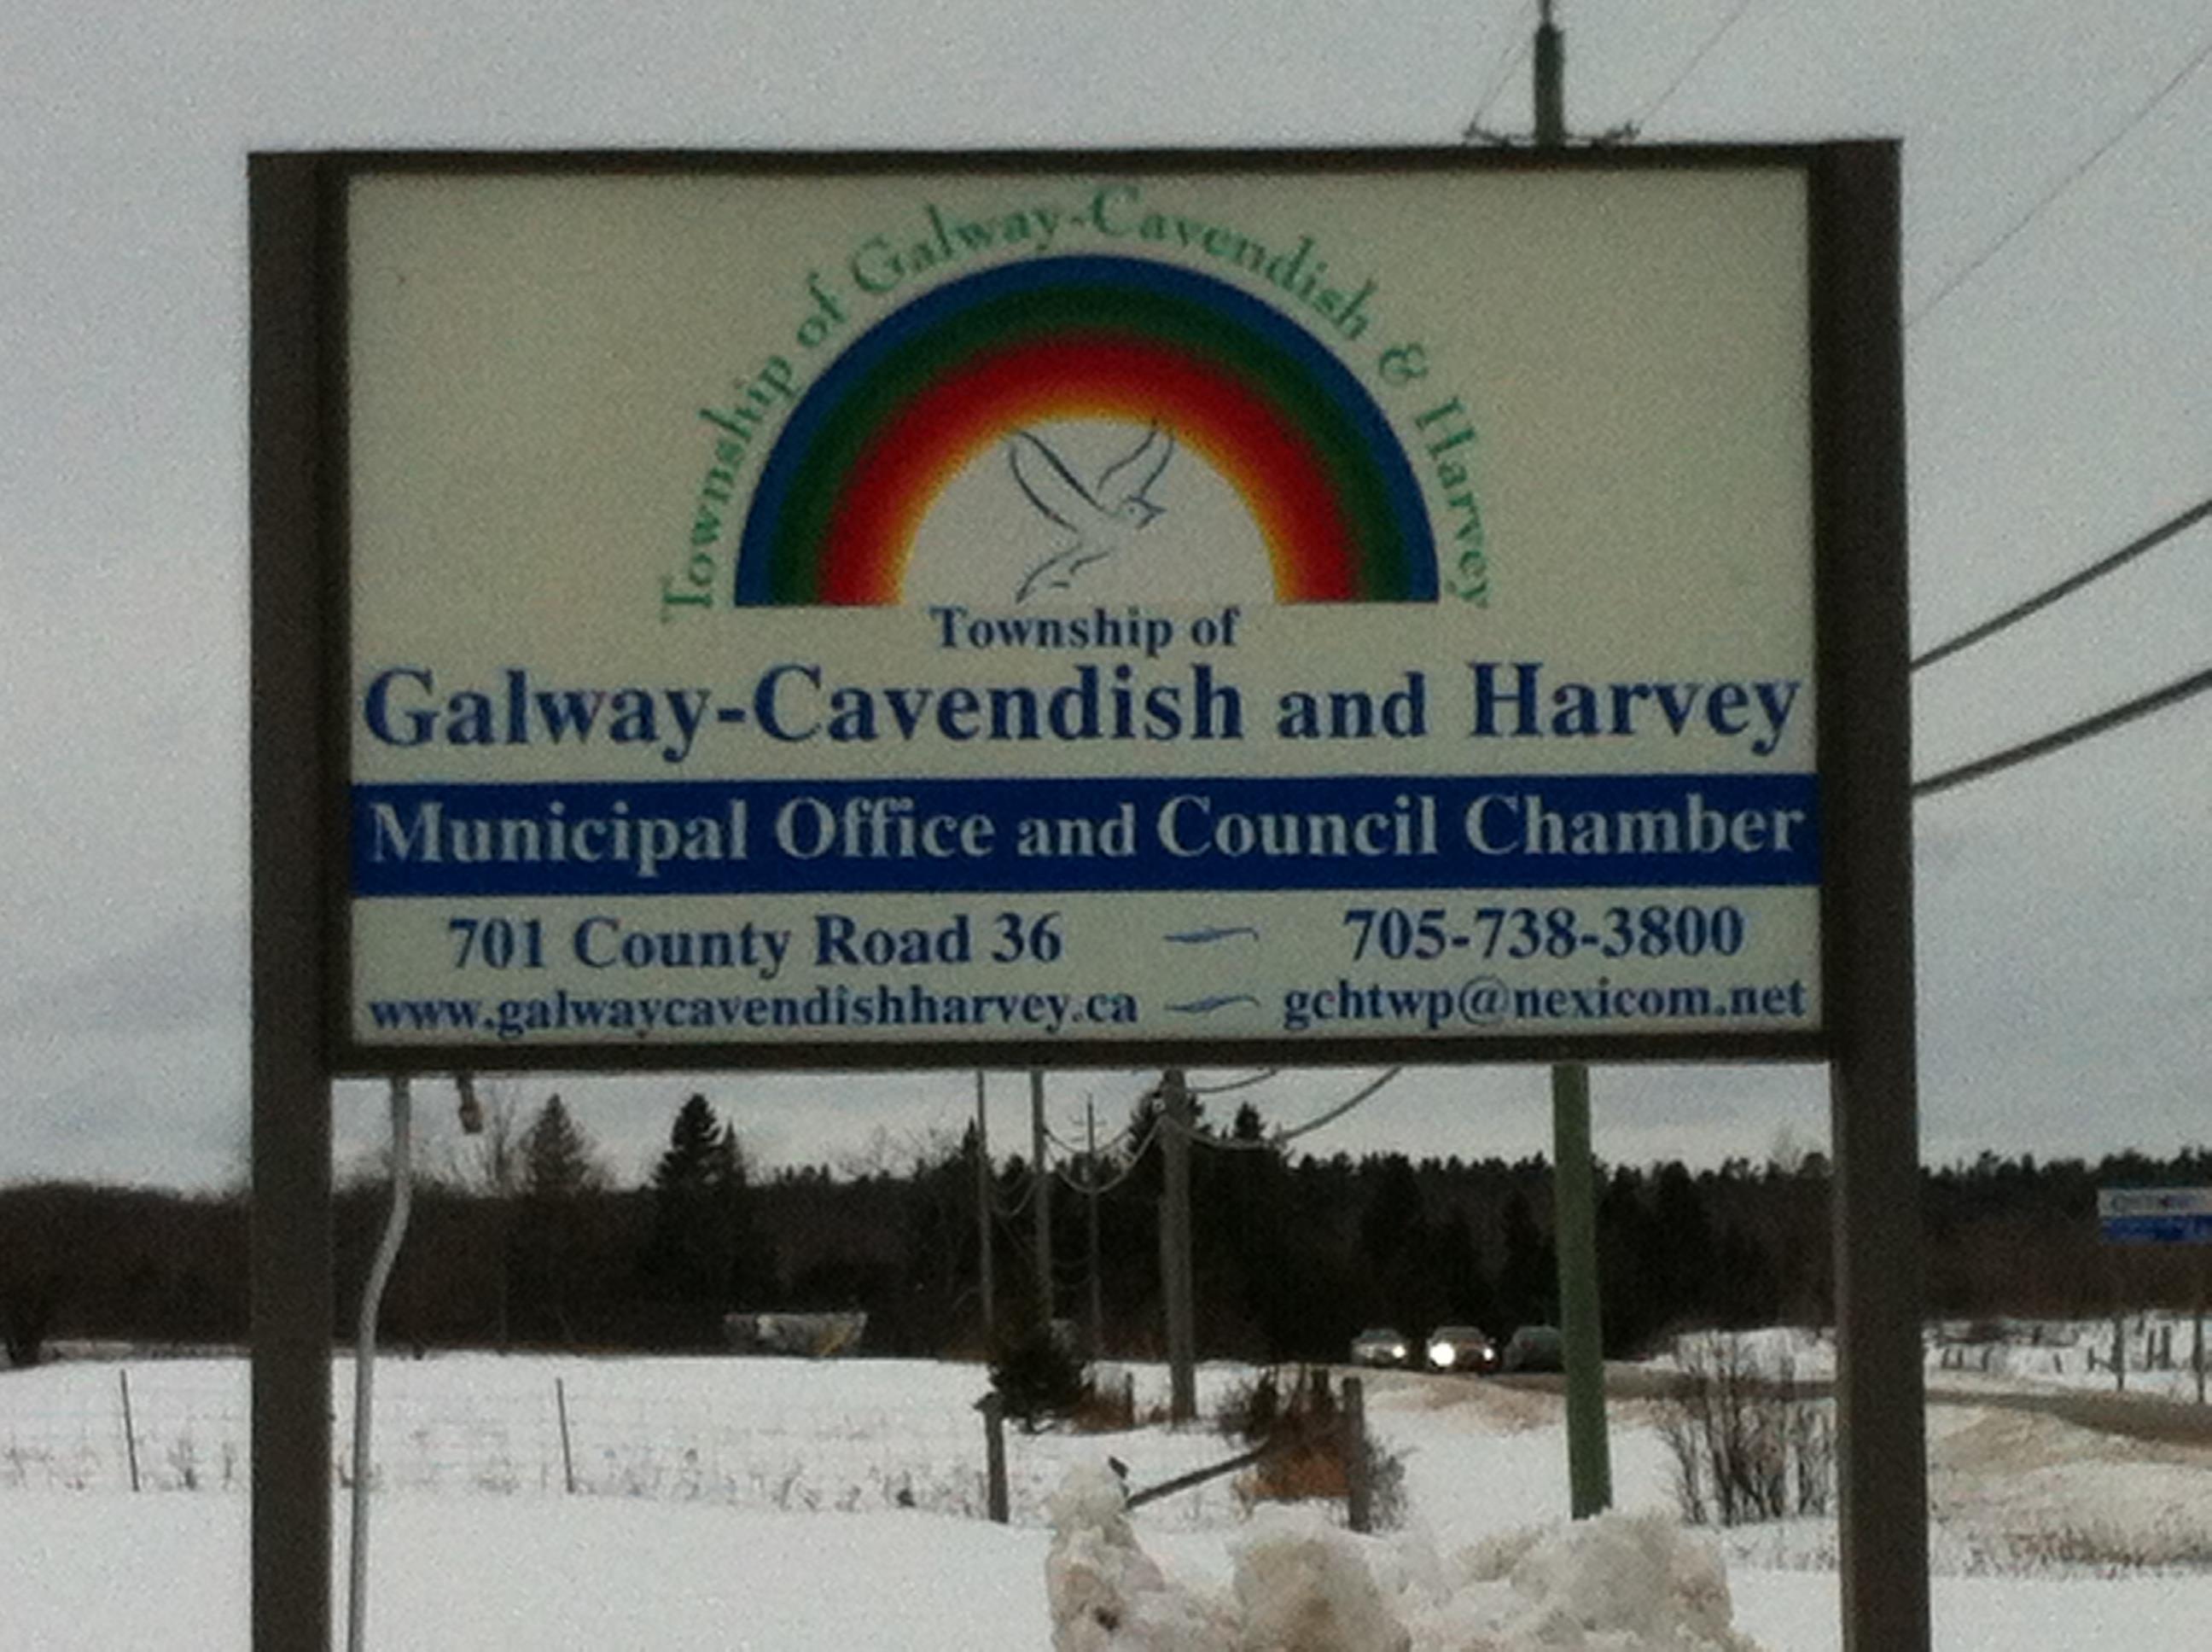 Municipality of Trent Lakes - Galway-Cavendish and Harvey - Municipal Office - Brad Nelson - waterfront real estate